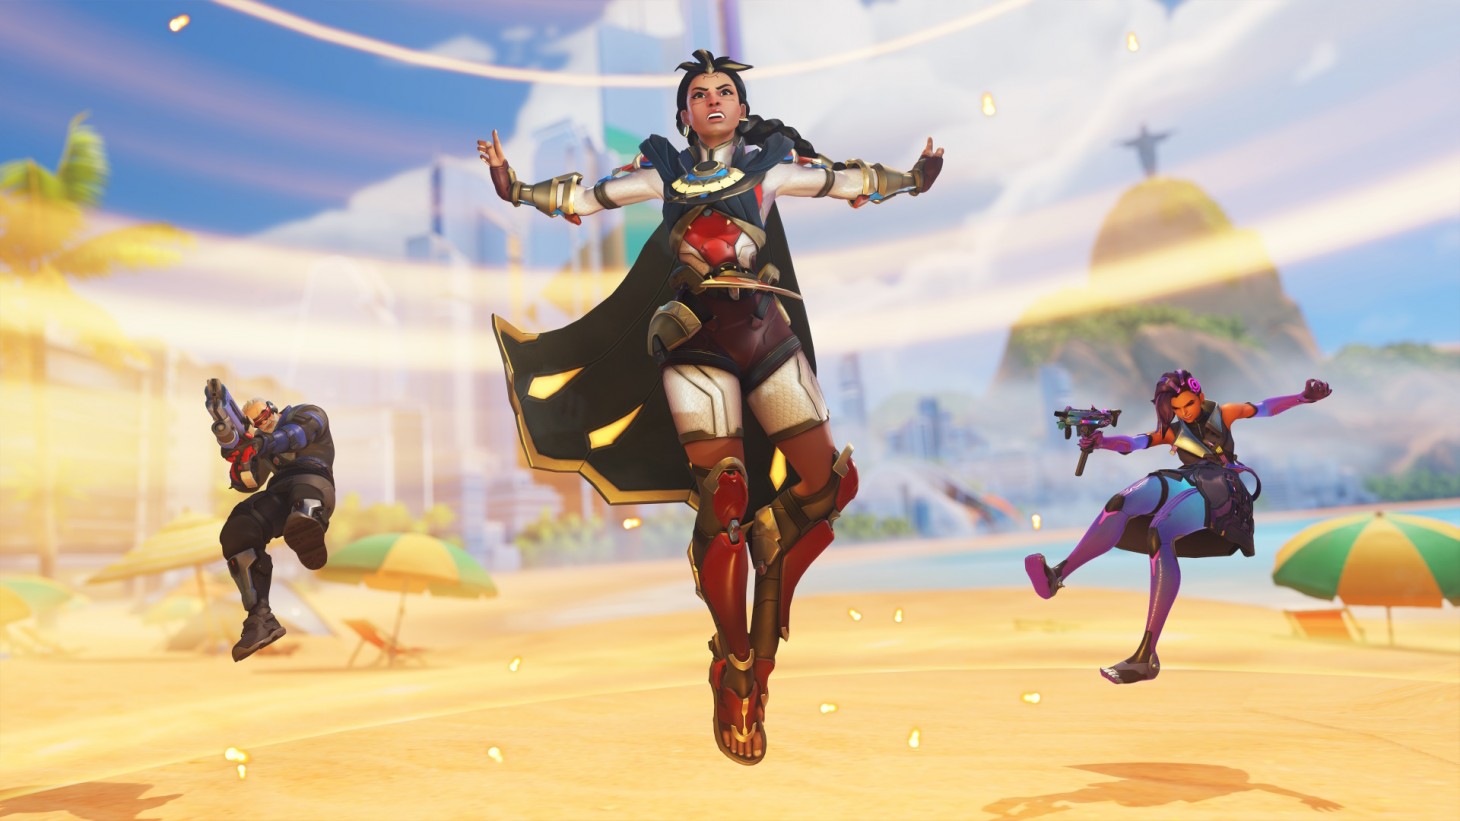 The top 5 Overwatch 2 workshop codes for March 2023